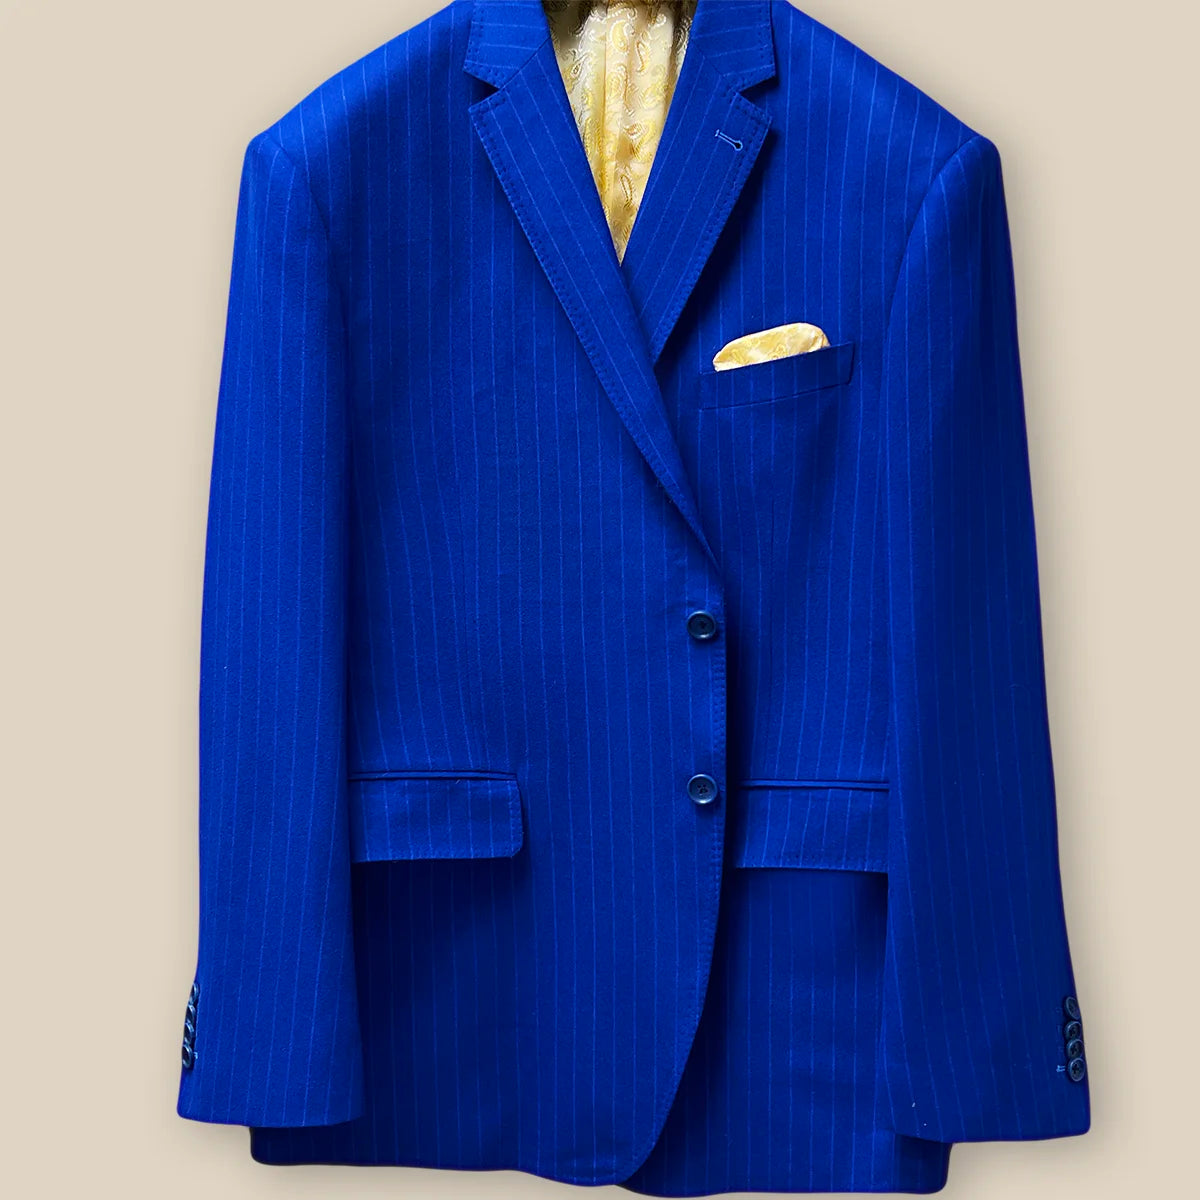 Detailed view of the jacket button panel on the royal blue pinstripe suit.